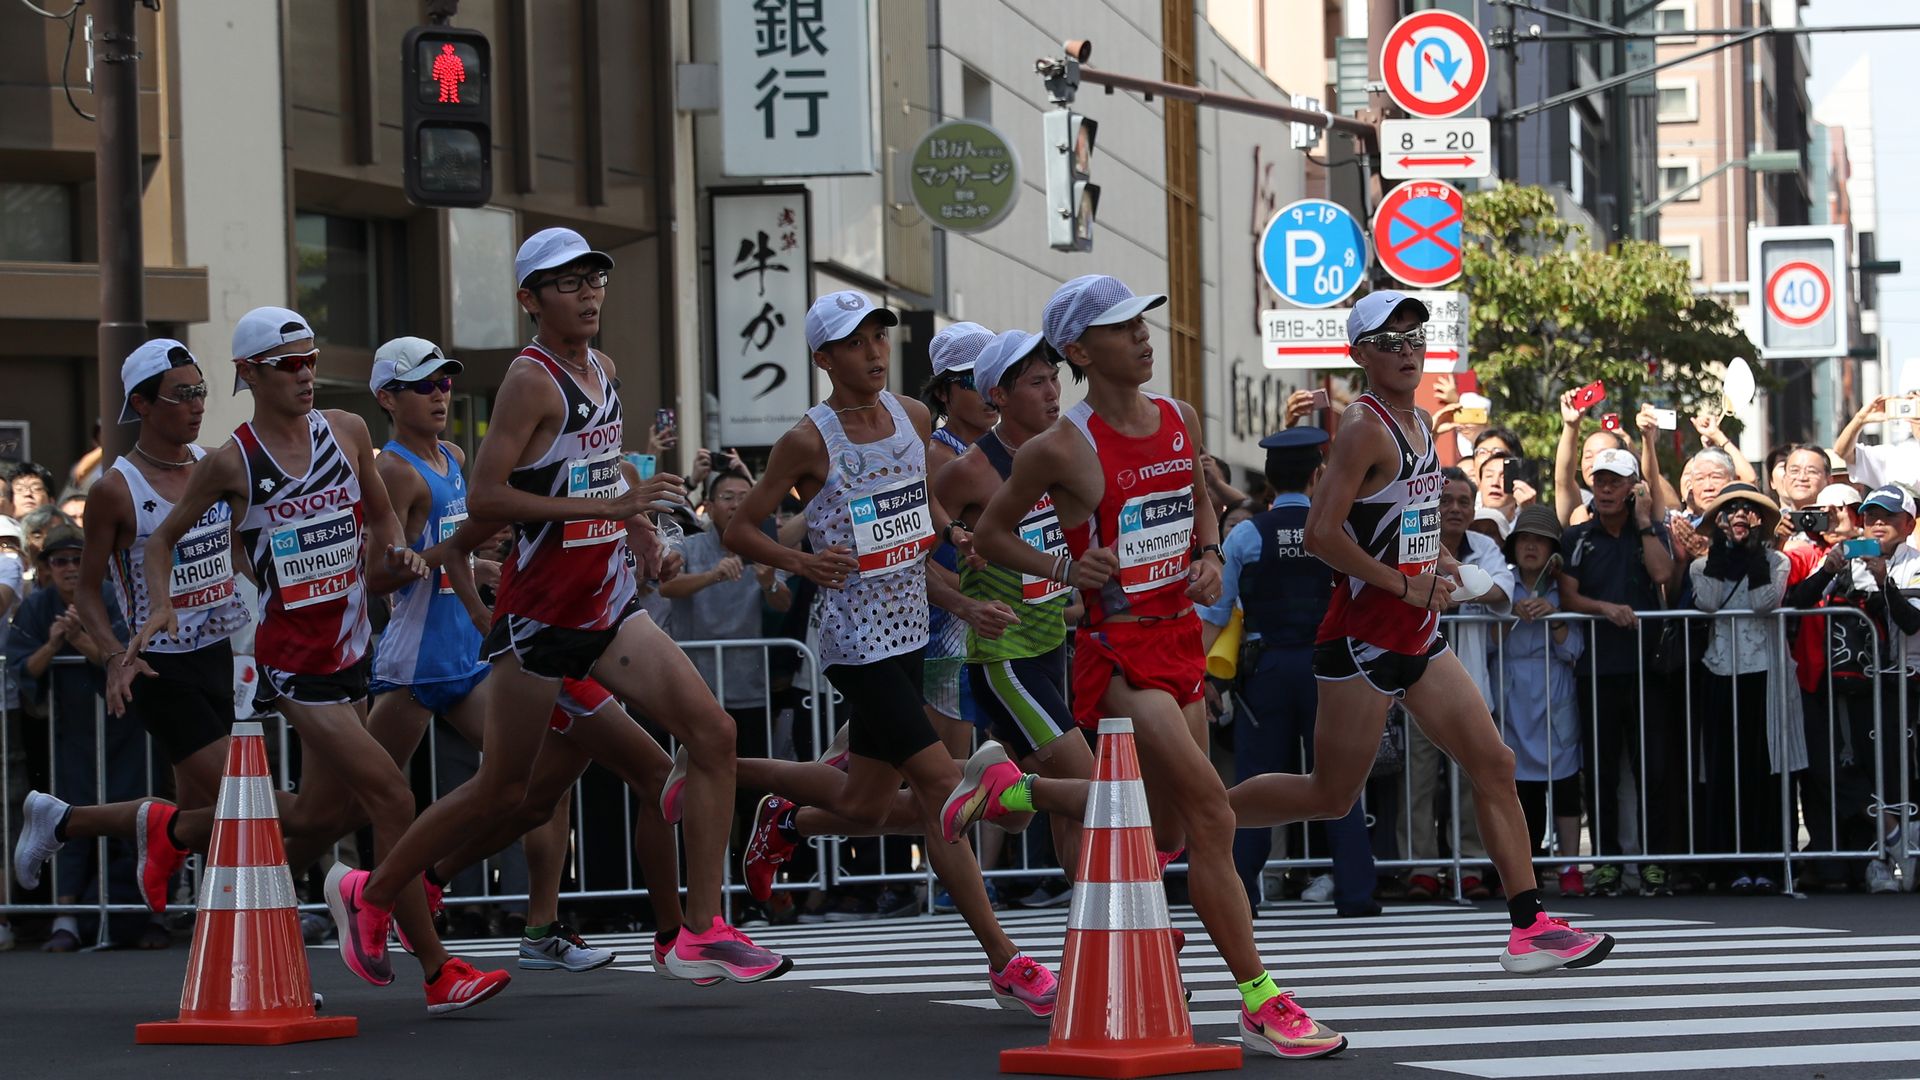  Runners at the Tokyo 2020 Test Event on Sept. 15, 2019